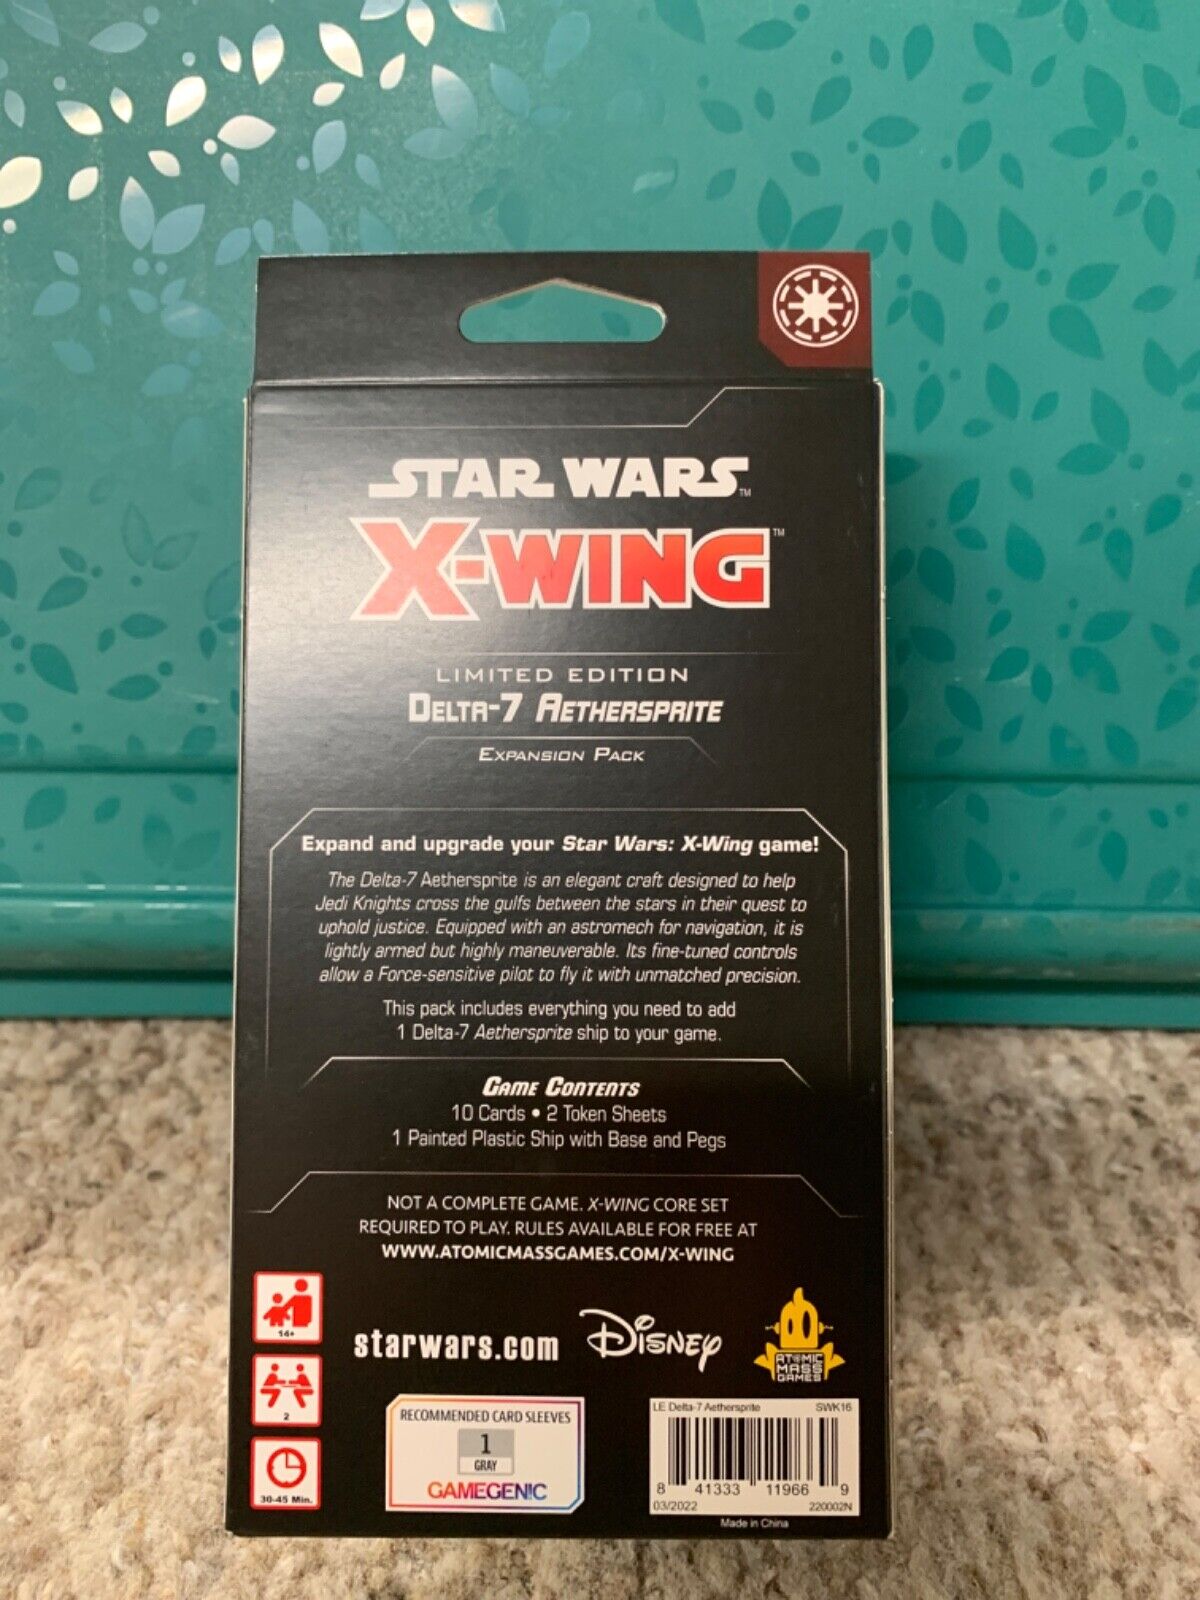 Star Wars Celebration 2022 Limited Edition Delta-7 Aethersprite X-Wing Expansion